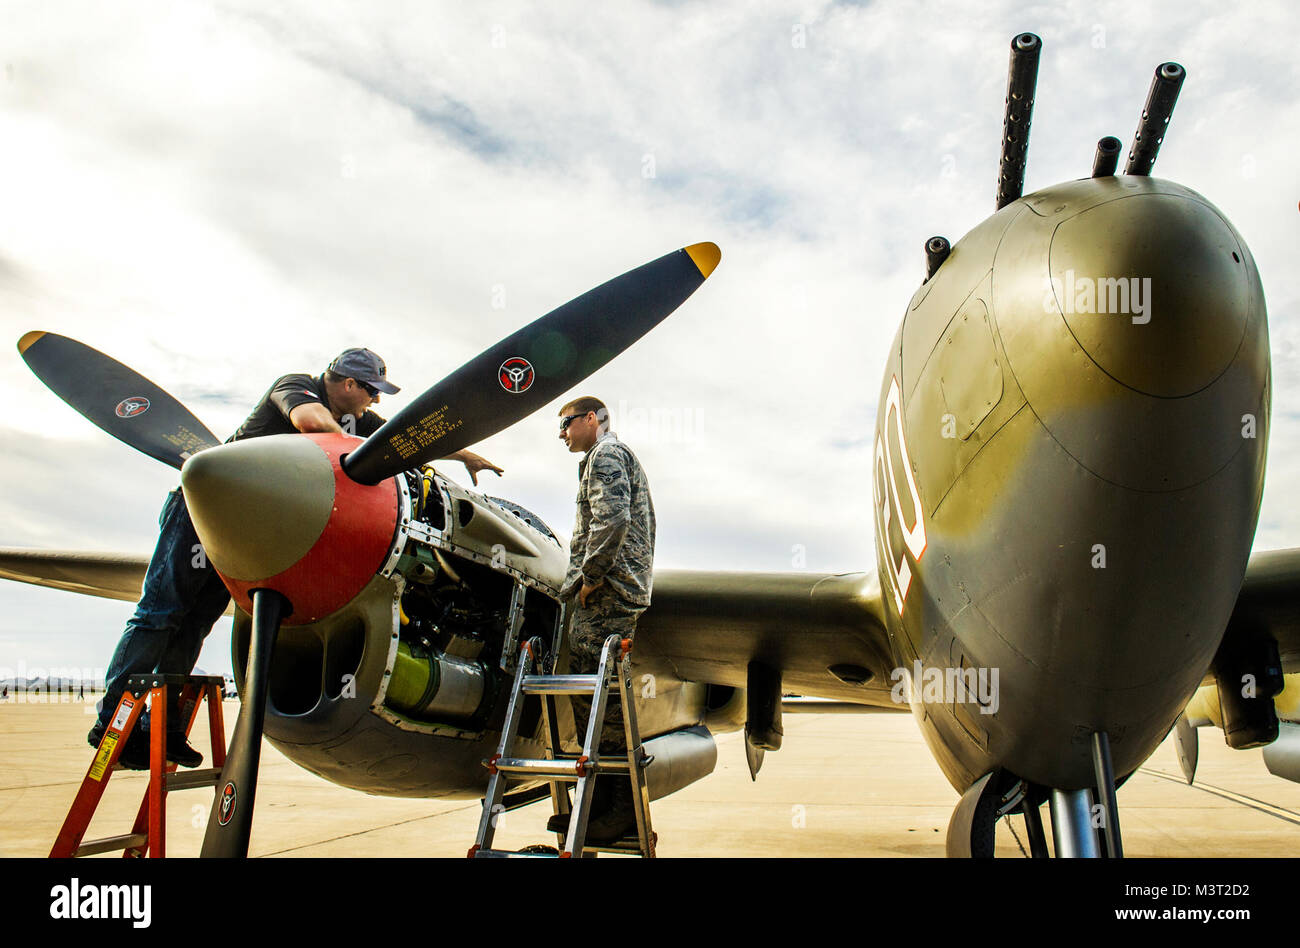 Senior Airman Anthony Naugle, right, an A-10 crew chief with the 357th Fighter Squadron, 355th Fighter Group based at Davis-Monthan AFB, Tucson, Ariz., gets a lesson in the maintenance of one of the two 1,000 hp (746 kW), turbo-supercharged, 12-cylinder Allison V-1710 engines on a P-38 'Lightning' from Doug Abshier after the day's practice flights at the Heritage Flight Training Course, Mar 5, 2016. (U.S. Air Force photo by J.M. Eddins Jr.) 160305-F-LW859-021 by AirmanMagazine Stock Photo